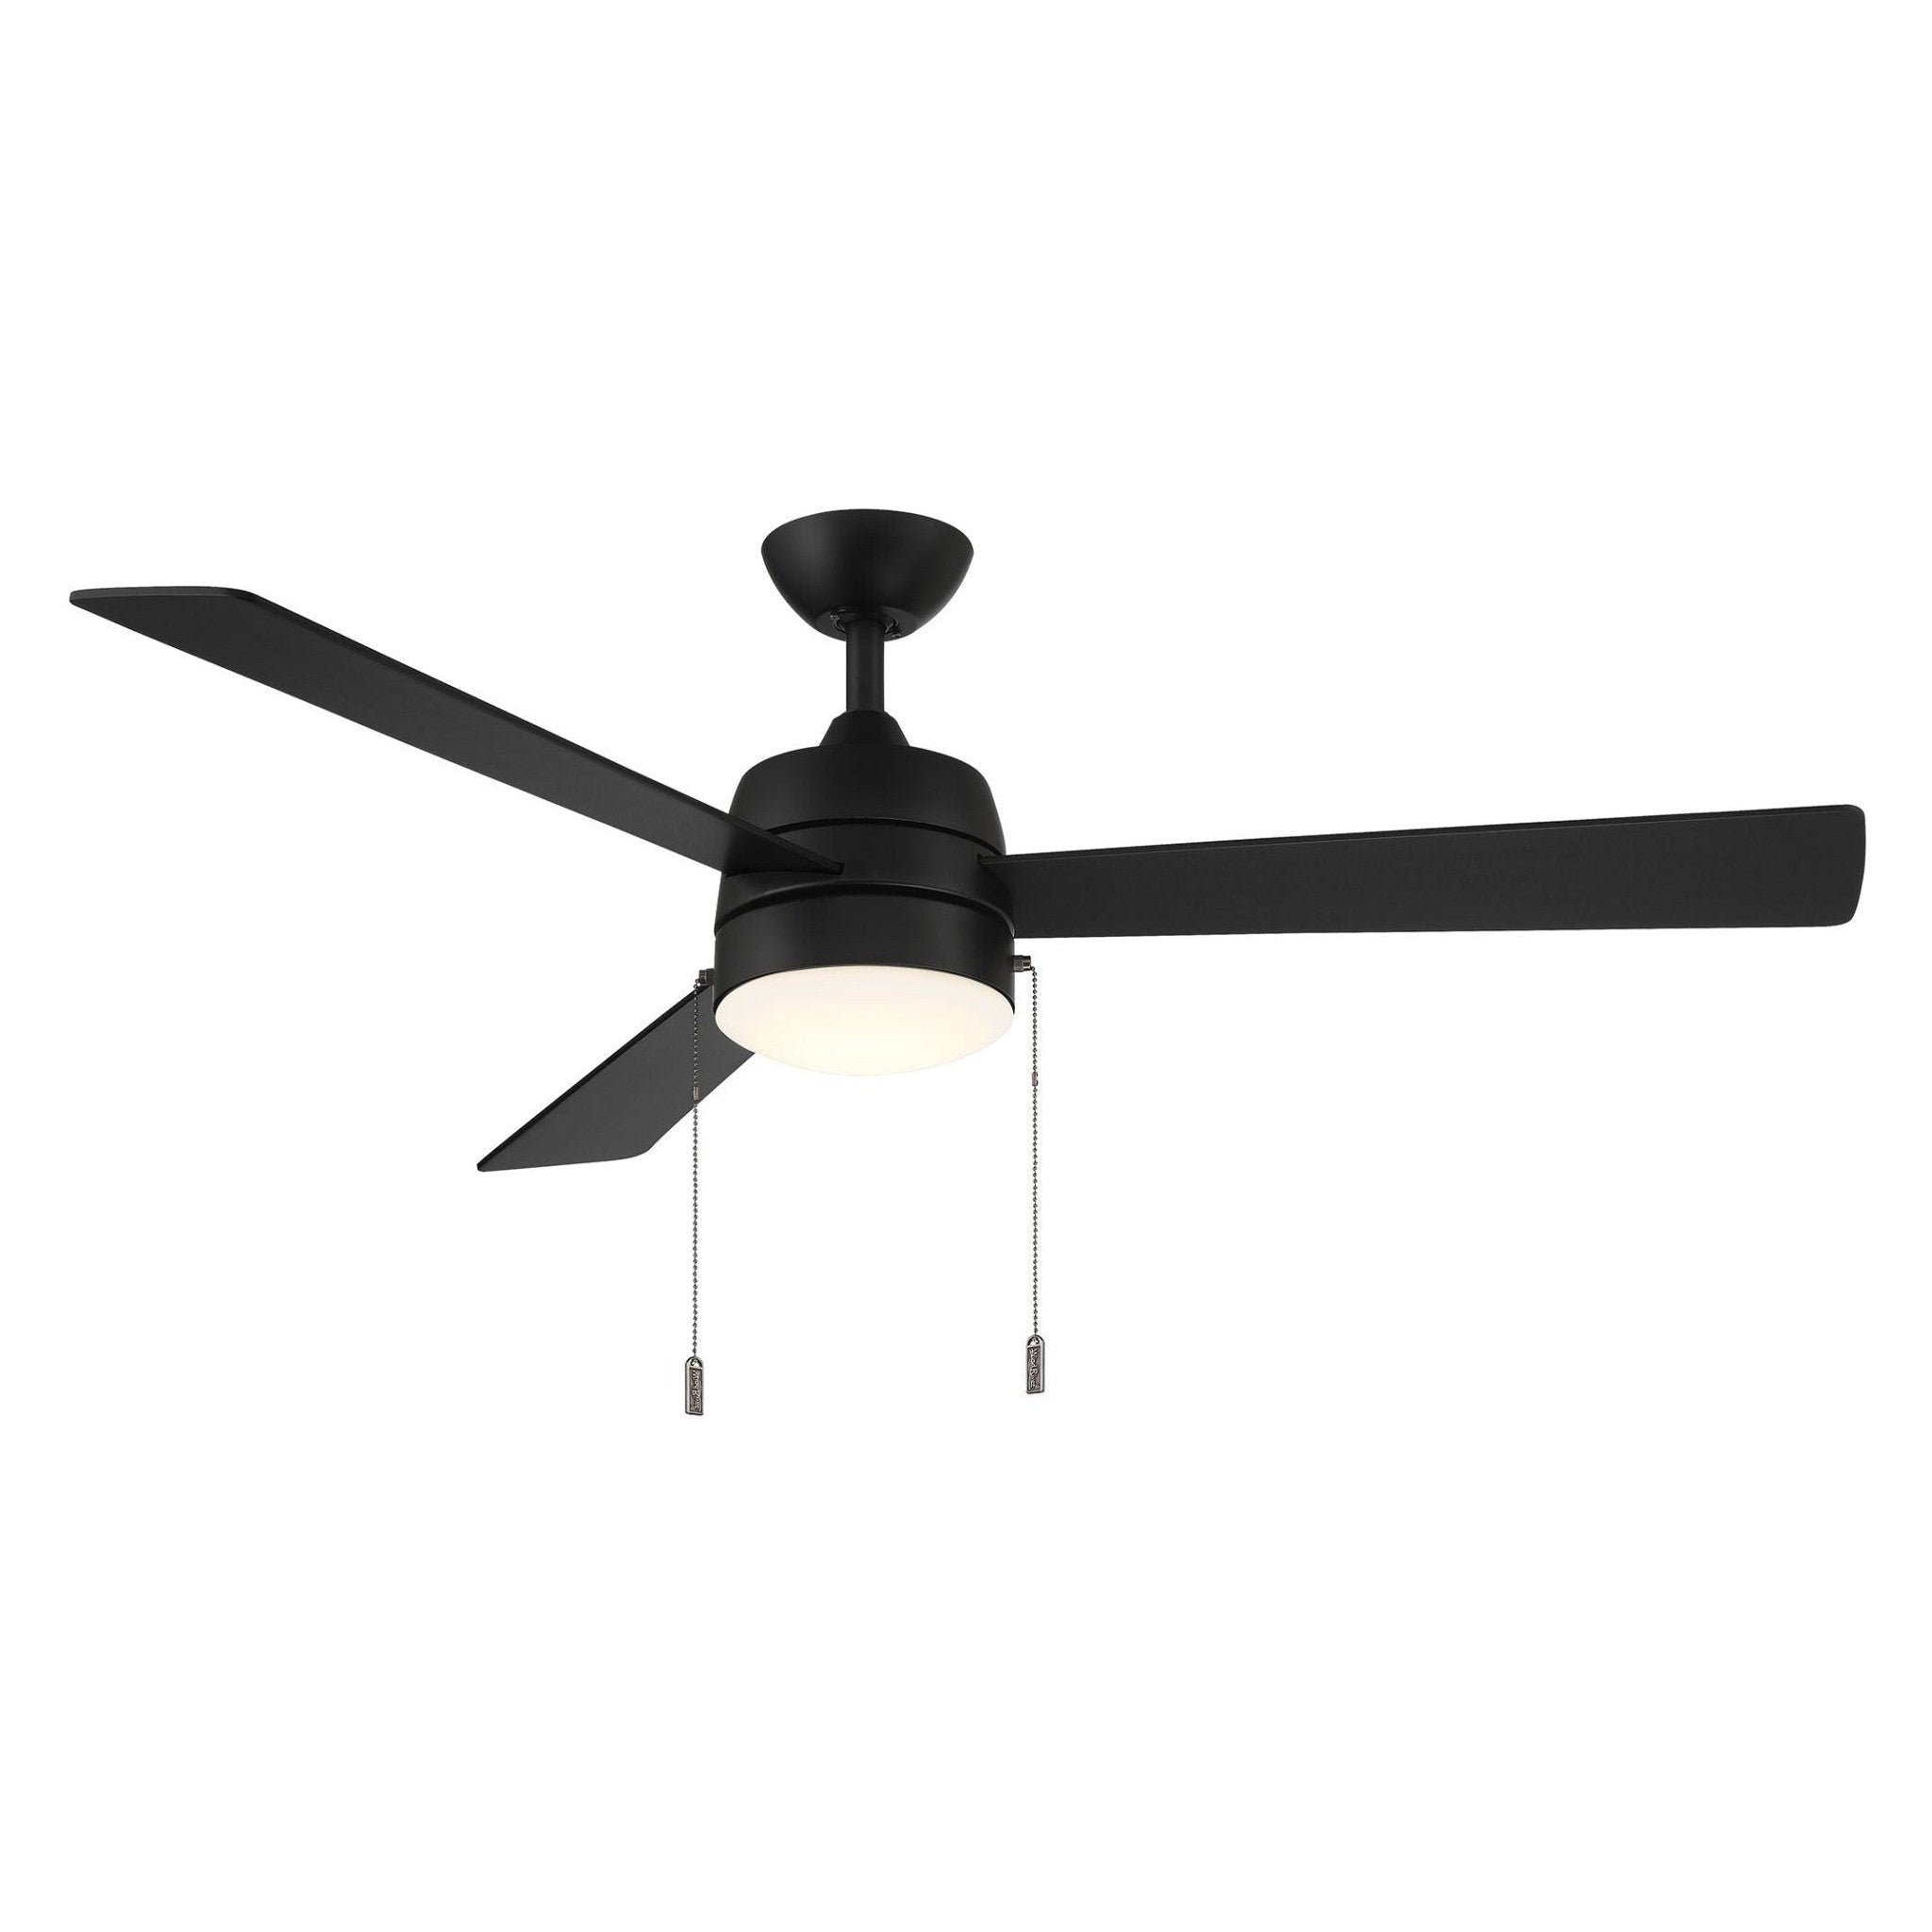 Wind River Nolan 52" 3 Blade Pull Chain LED Ceiling Fan